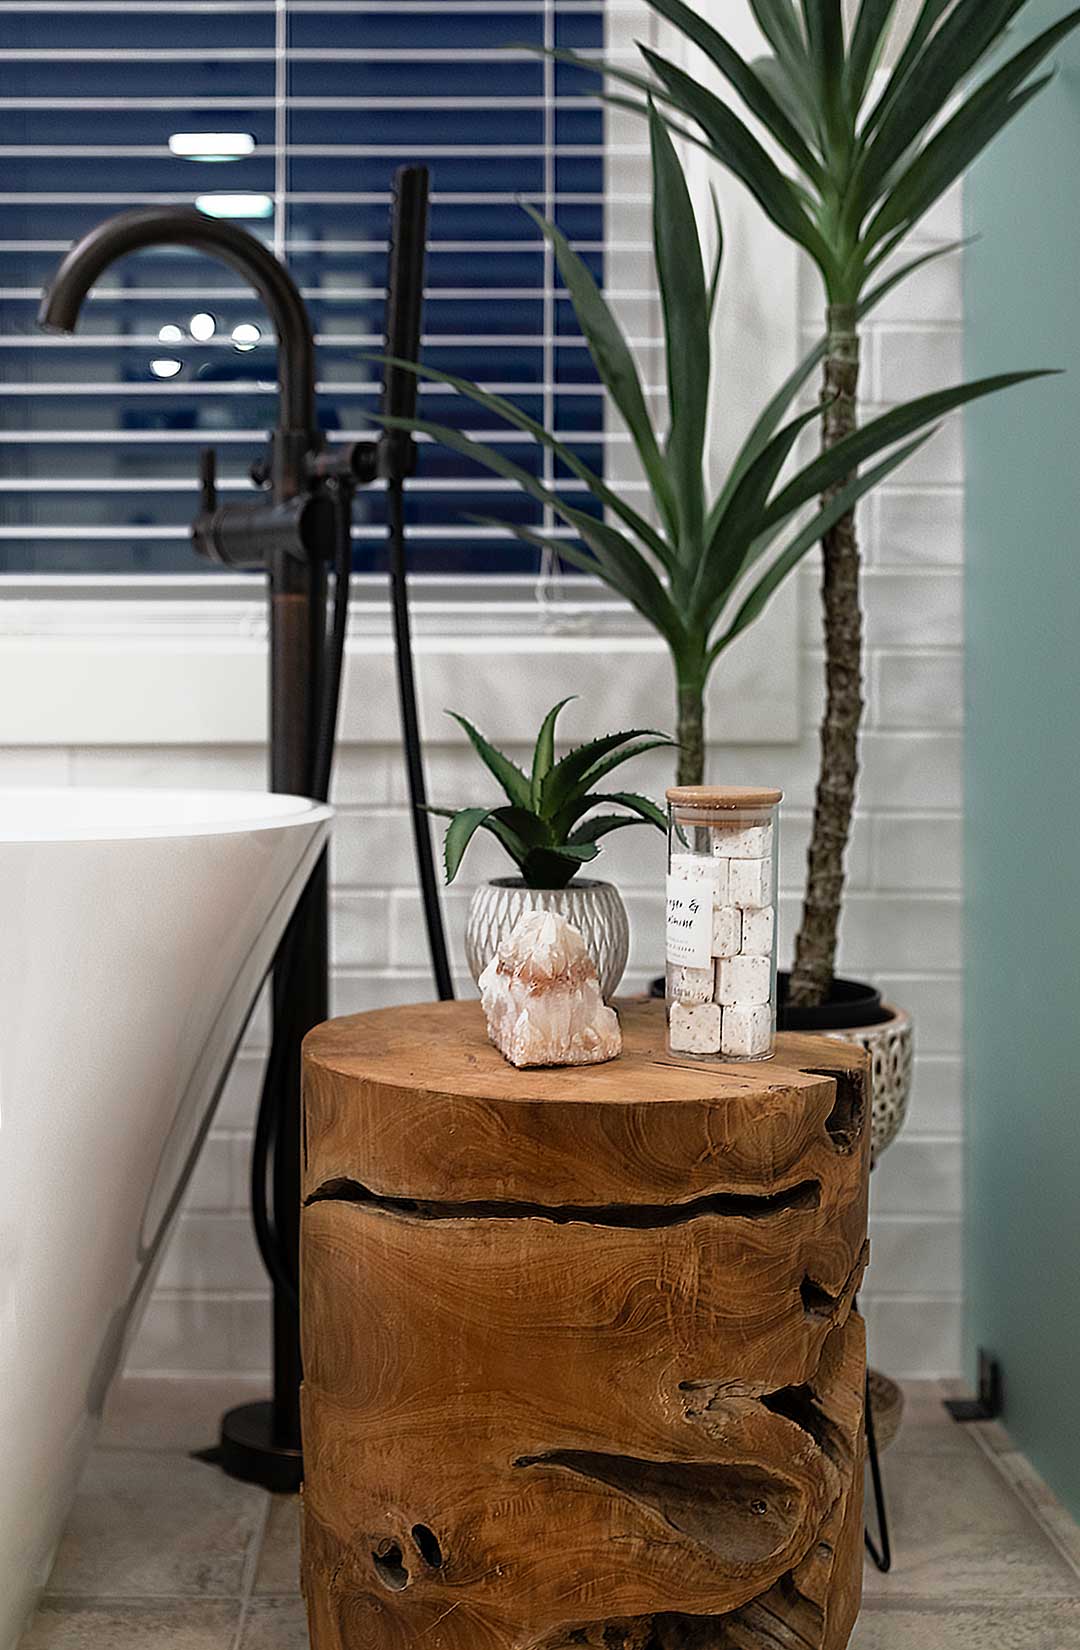 Detailed view of a natural wood stool with bath soaps and plants next to the modern faucet and freestanding tub 